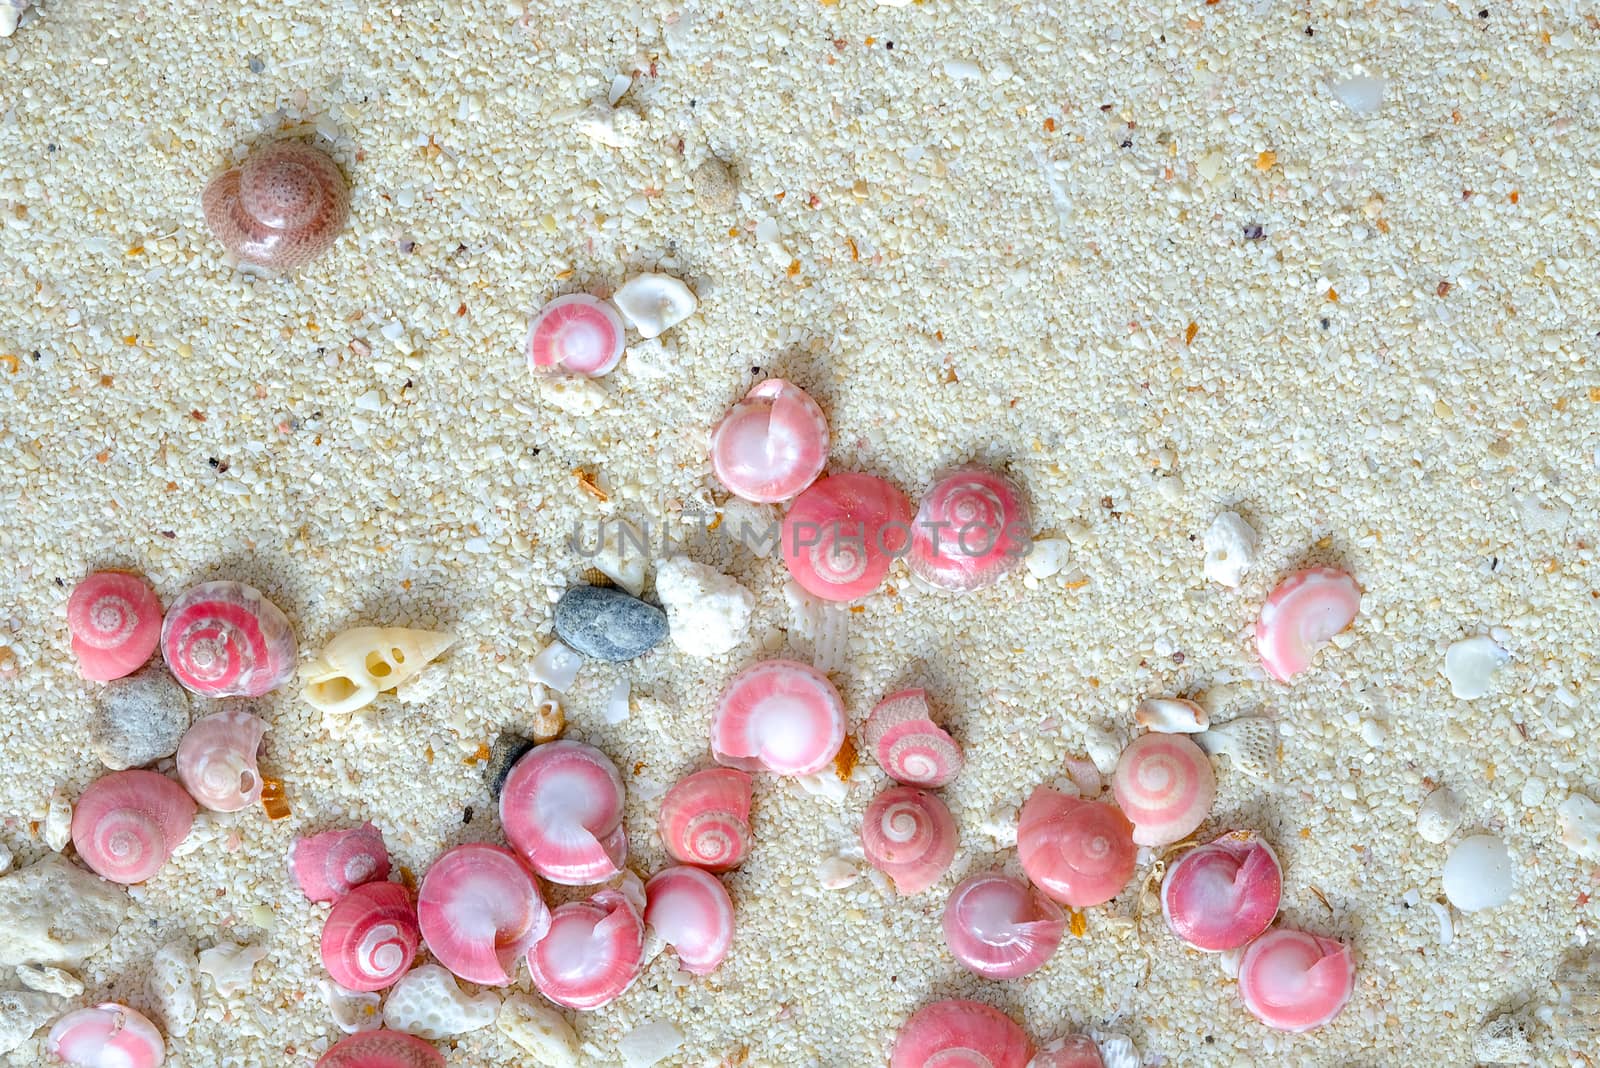 shells of pink button snails on the sand by Nawoot